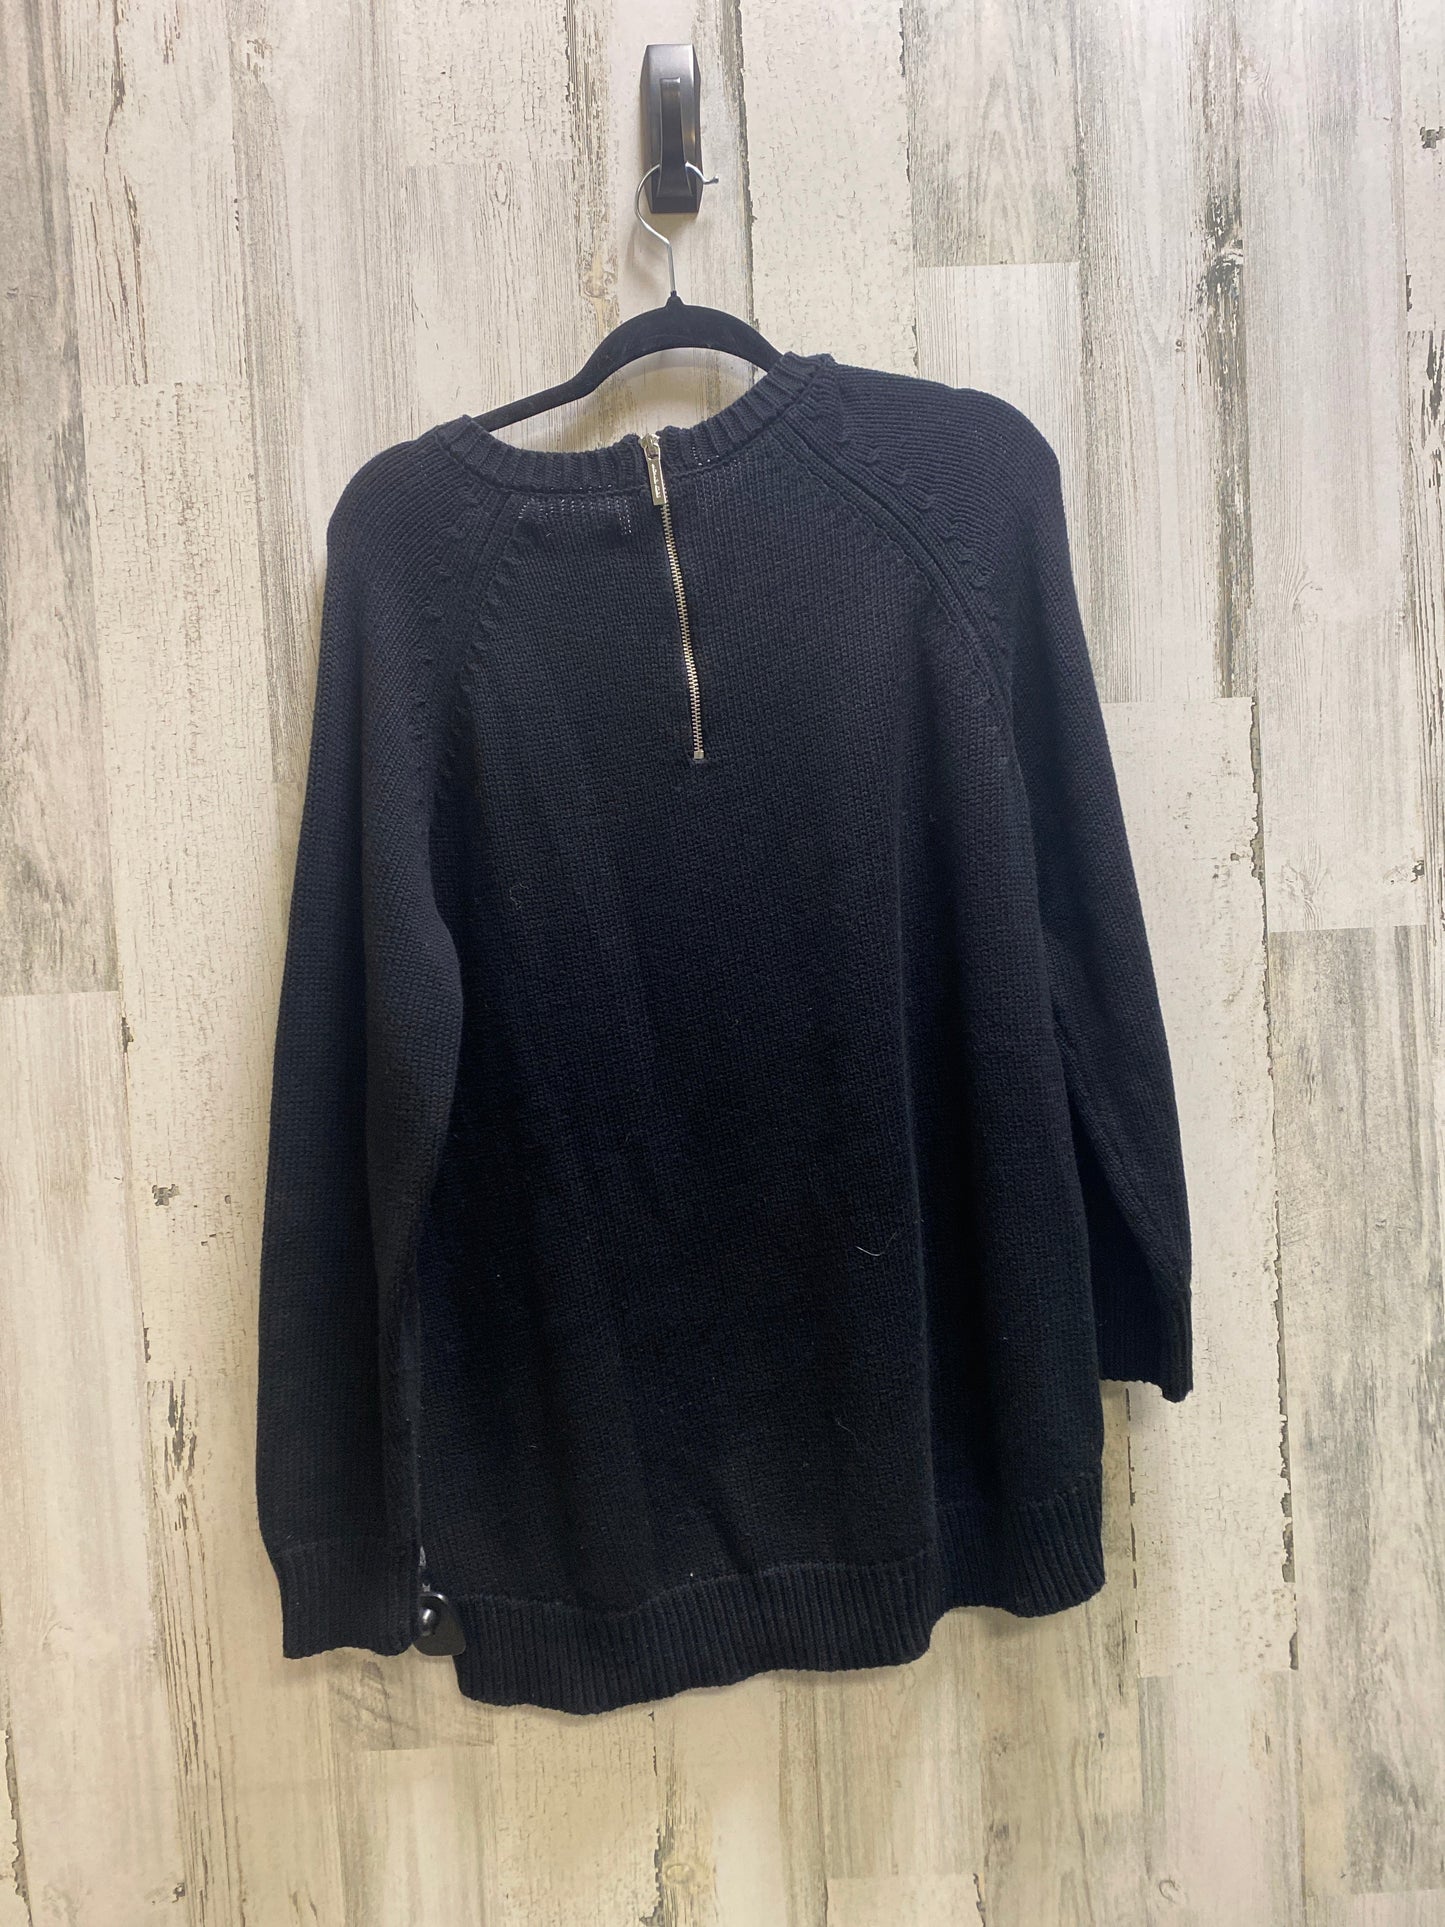 Sweater By Michael By Michael Kors  Size: 1x